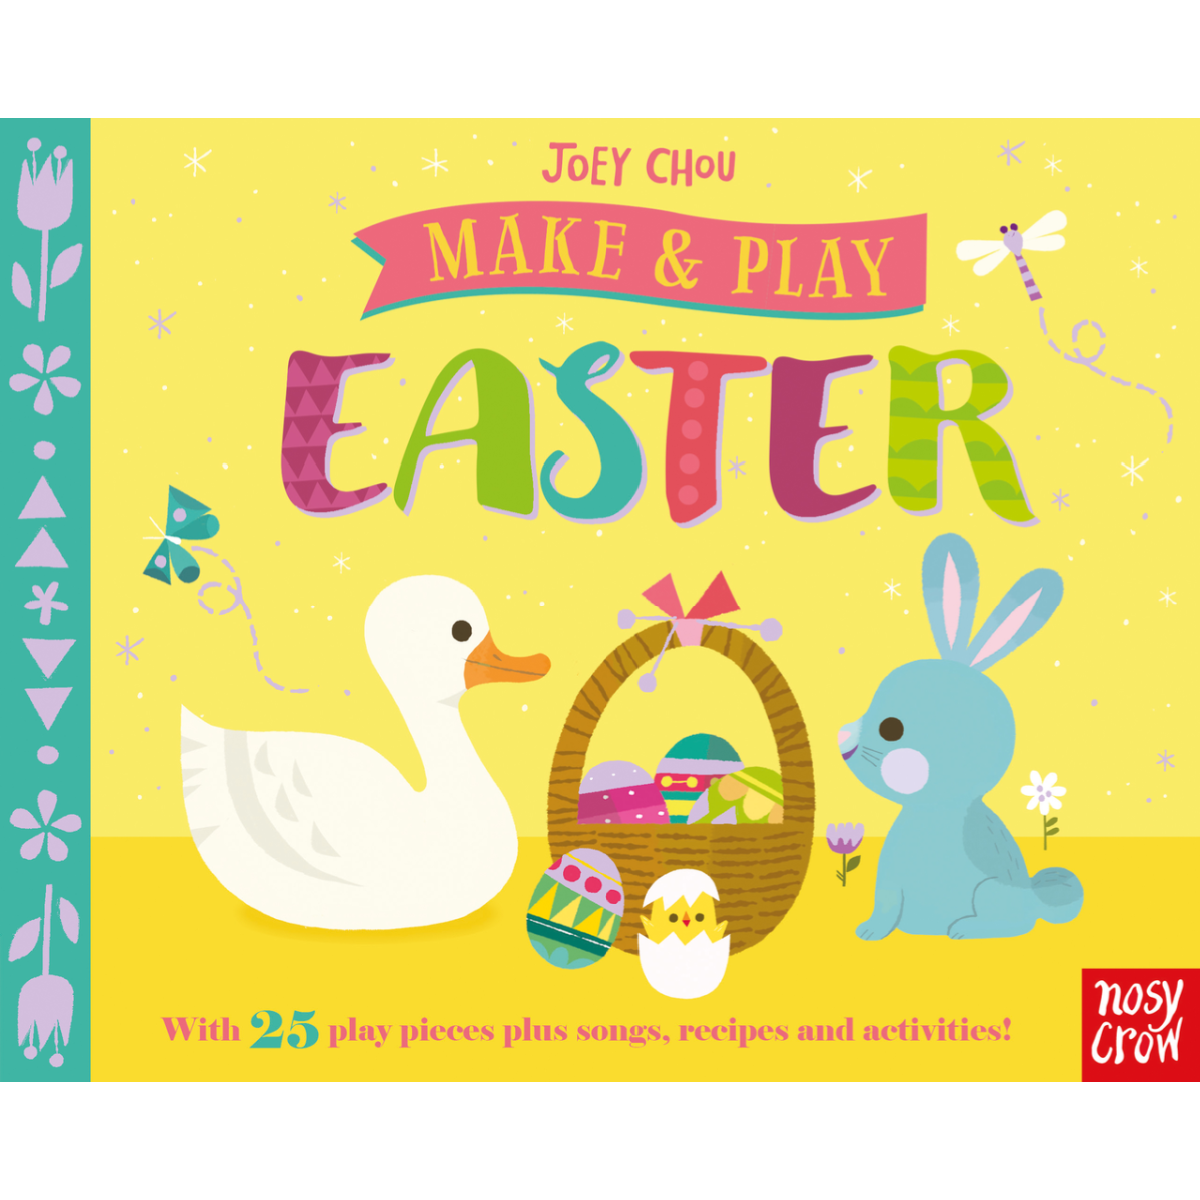 Make and Play: Easter